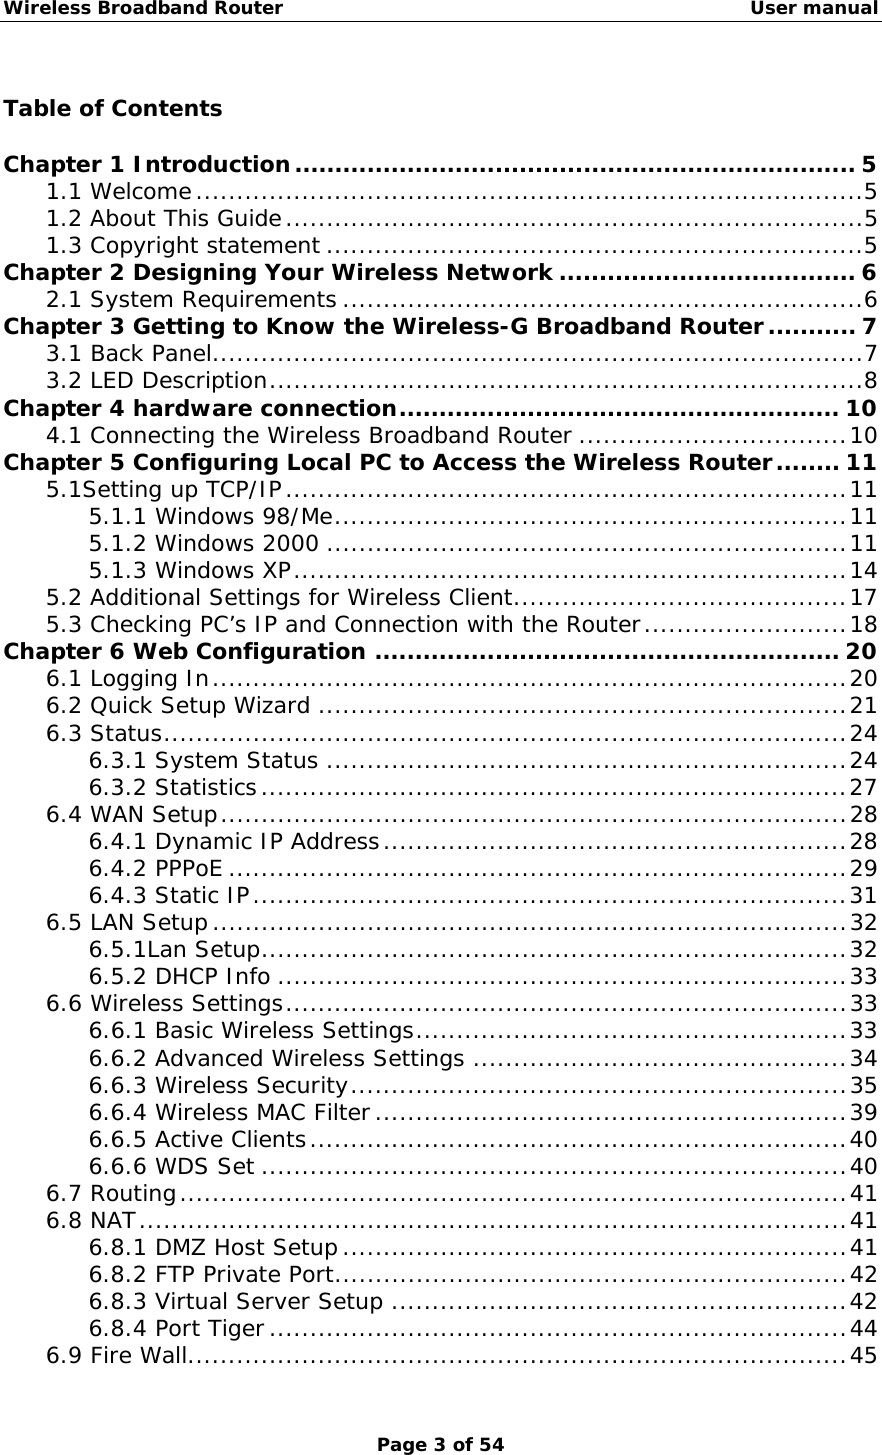 Wireless Broadband Router                                                   User manual Page 3 of 54  Table of Contents  Chapter 1 Introduction...................................................................... 5 1.1 Welcome..................................................................................5 1.2 About This Guide.......................................................................5 1.3 Copyright statement ..................................................................5 Chapter 2 Designing Your Wireless Network ..................................... 6 2.1 System Requirements ................................................................6 Chapter 3 Getting to Know the Wireless-G Broadband Router........... 7 3.1 Back Panel................................................................................7 3.2 LED Description.........................................................................8 Chapter 4 hardware connection....................................................... 10 4.1 Connecting the Wireless Broadband Router .................................10 Chapter 5 Configuring Local PC to Access the Wireless Router........ 11 5.1Setting up TCP/IP.....................................................................11 5.1.1 Windows 98/Me...............................................................11 5.1.2 Windows 2000 ................................................................11 5.1.3 Windows XP....................................................................14 5.2 Additional Settings for Wireless Client.........................................17 5.3 Checking PC’s IP and Connection with the Router.........................18 Chapter 6 Web Configuration .......................................................... 20 6.1 Logging In..............................................................................20 6.2 Quick Setup Wizard .................................................................21 6.3 Status....................................................................................24 6.3.1 System Status ................................................................24 6.3.2 Statistics........................................................................27 6.4 WAN Setup.............................................................................28 6.4.1 Dynamic IP Address.........................................................28 6.4.2 PPPoE ............................................................................29 6.4.3 Static IP.........................................................................31 6.5 LAN Setup ..............................................................................32 6.5.1Lan Setup........................................................................32 6.5.2 DHCP Info ......................................................................33 6.6 Wireless Settings.....................................................................33 6.6.1 Basic Wireless Settings.....................................................33 6.6.2 Advanced Wireless Settings ..............................................34 6.6.3 Wireless Security.............................................................35 6.6.4 Wireless MAC Filter..........................................................39 6.6.5 Active Clients..................................................................40 6.6.6 WDS Set ........................................................................40 6.7 Routing..................................................................................41 6.8 NAT.......................................................................................41 6.8.1 DMZ Host Setup..............................................................41 6.8.2 FTP Private Port...............................................................42 6.8.3 Virtual Server Setup ........................................................42 6.8.4 Port Tiger.......................................................................44 6.9 Fire Wall.................................................................................45 